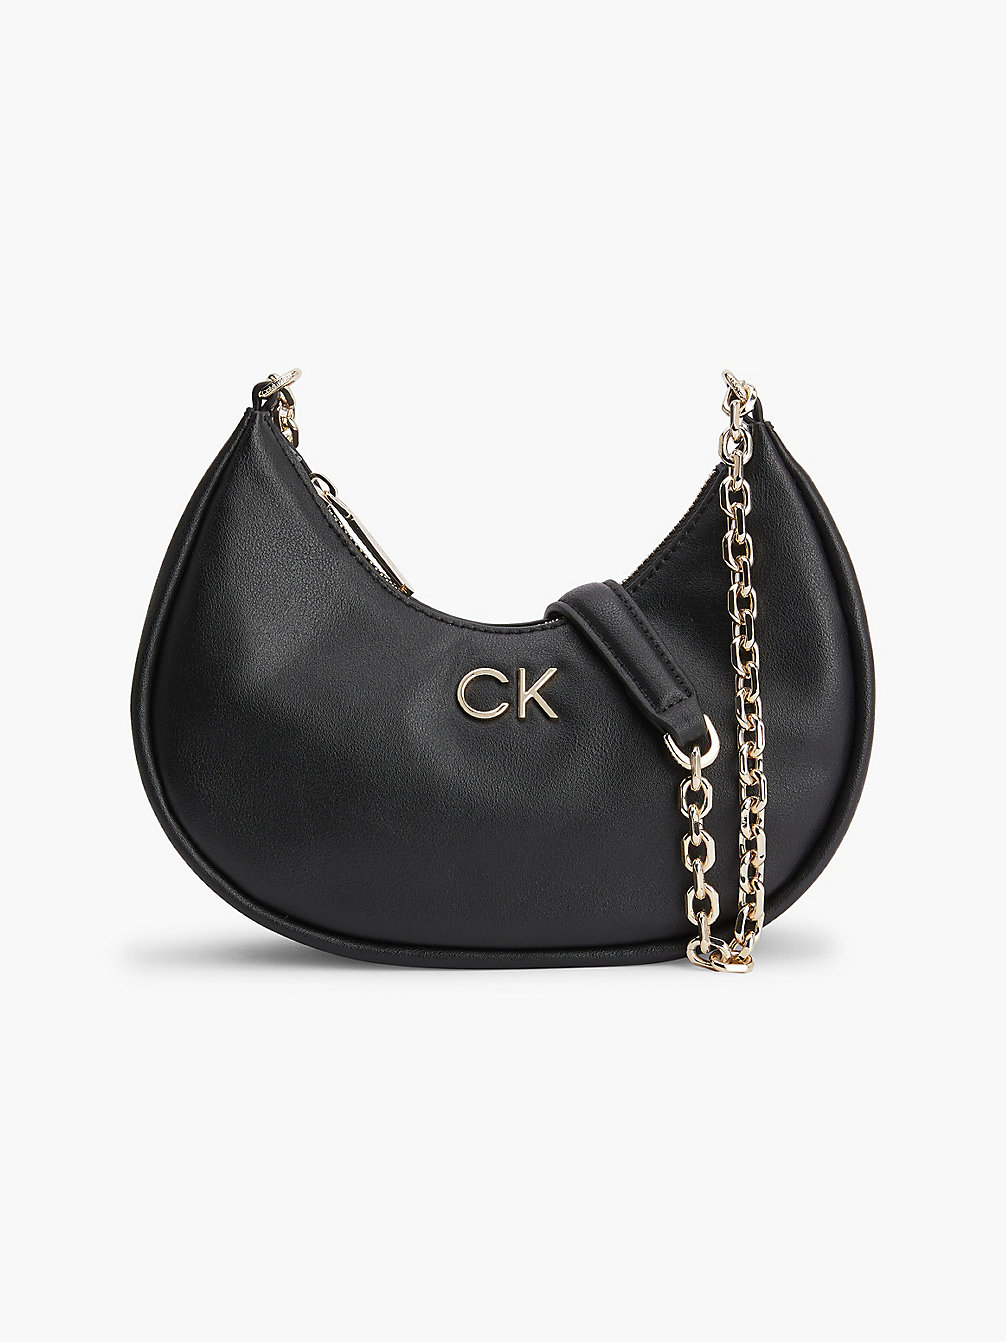 CK BLACK Small Recycled Shoulder Bag undefined women Calvin Klein